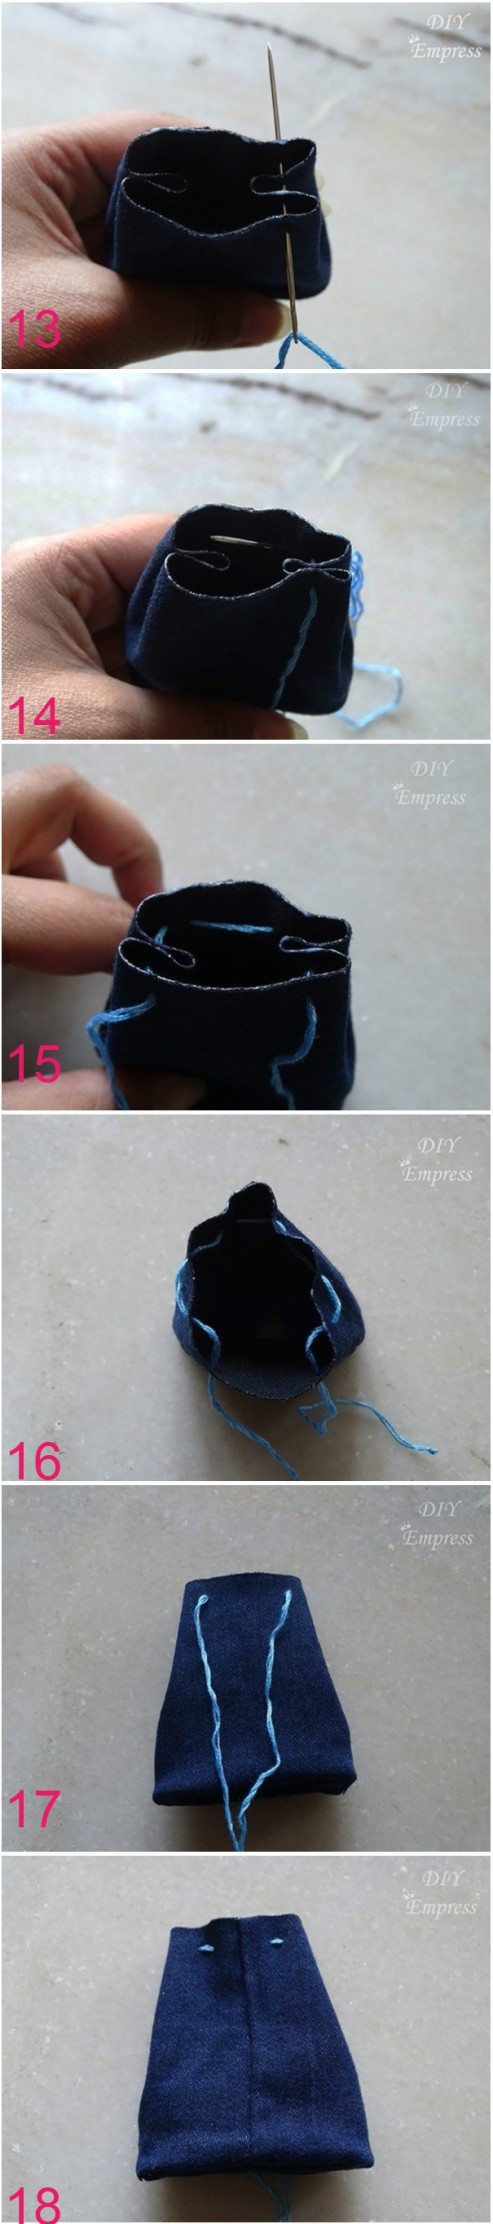 Mini backpack keychain or coin purse tutorial – DIY EMPRESS